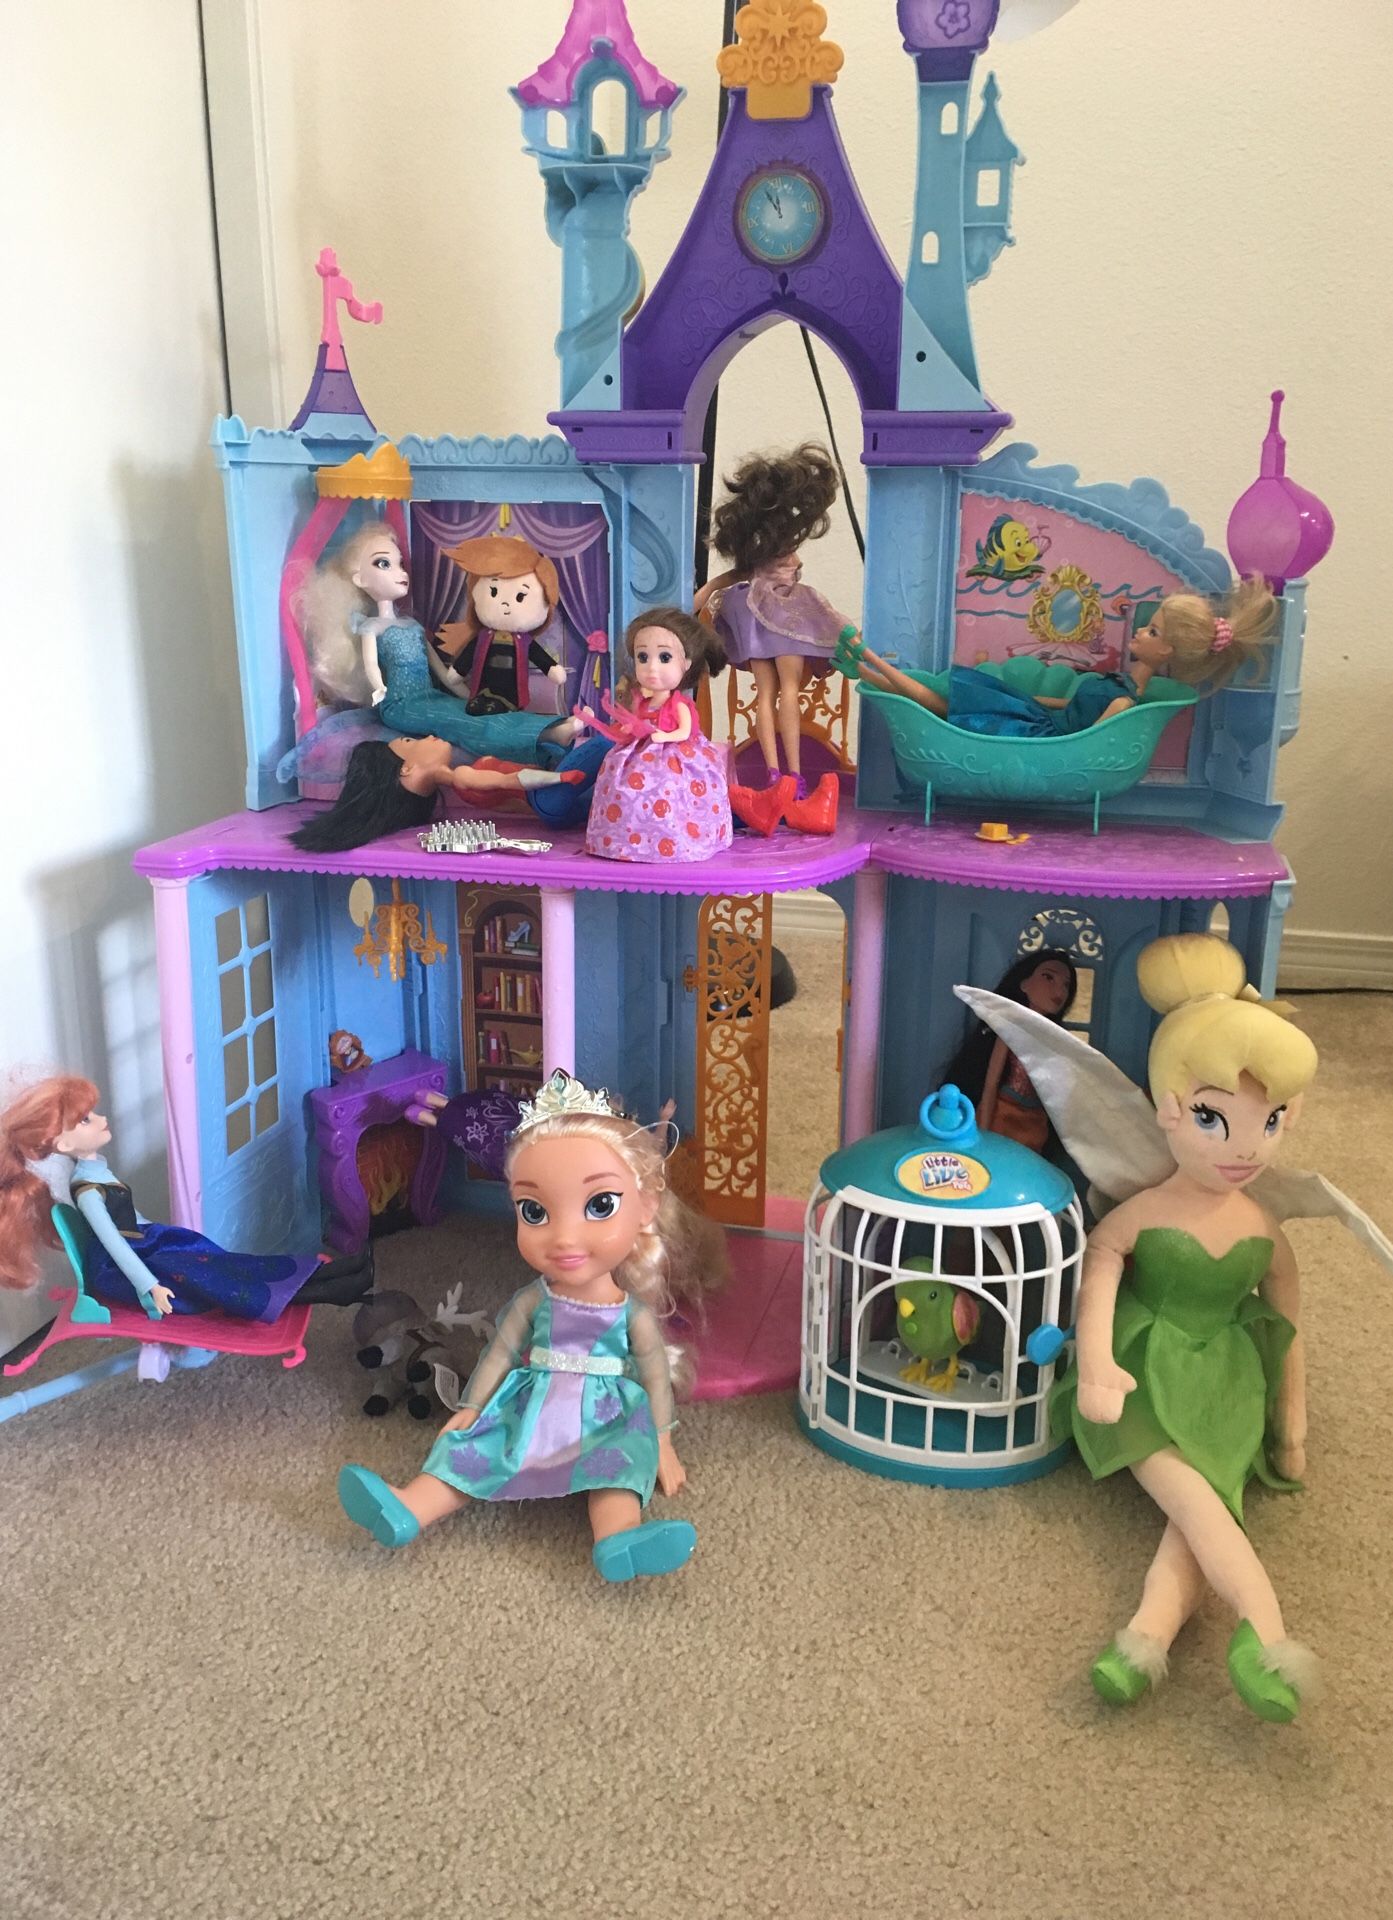 Princess doll house with dolls, parrot, other some toys and 2 board games and one puzzle $10